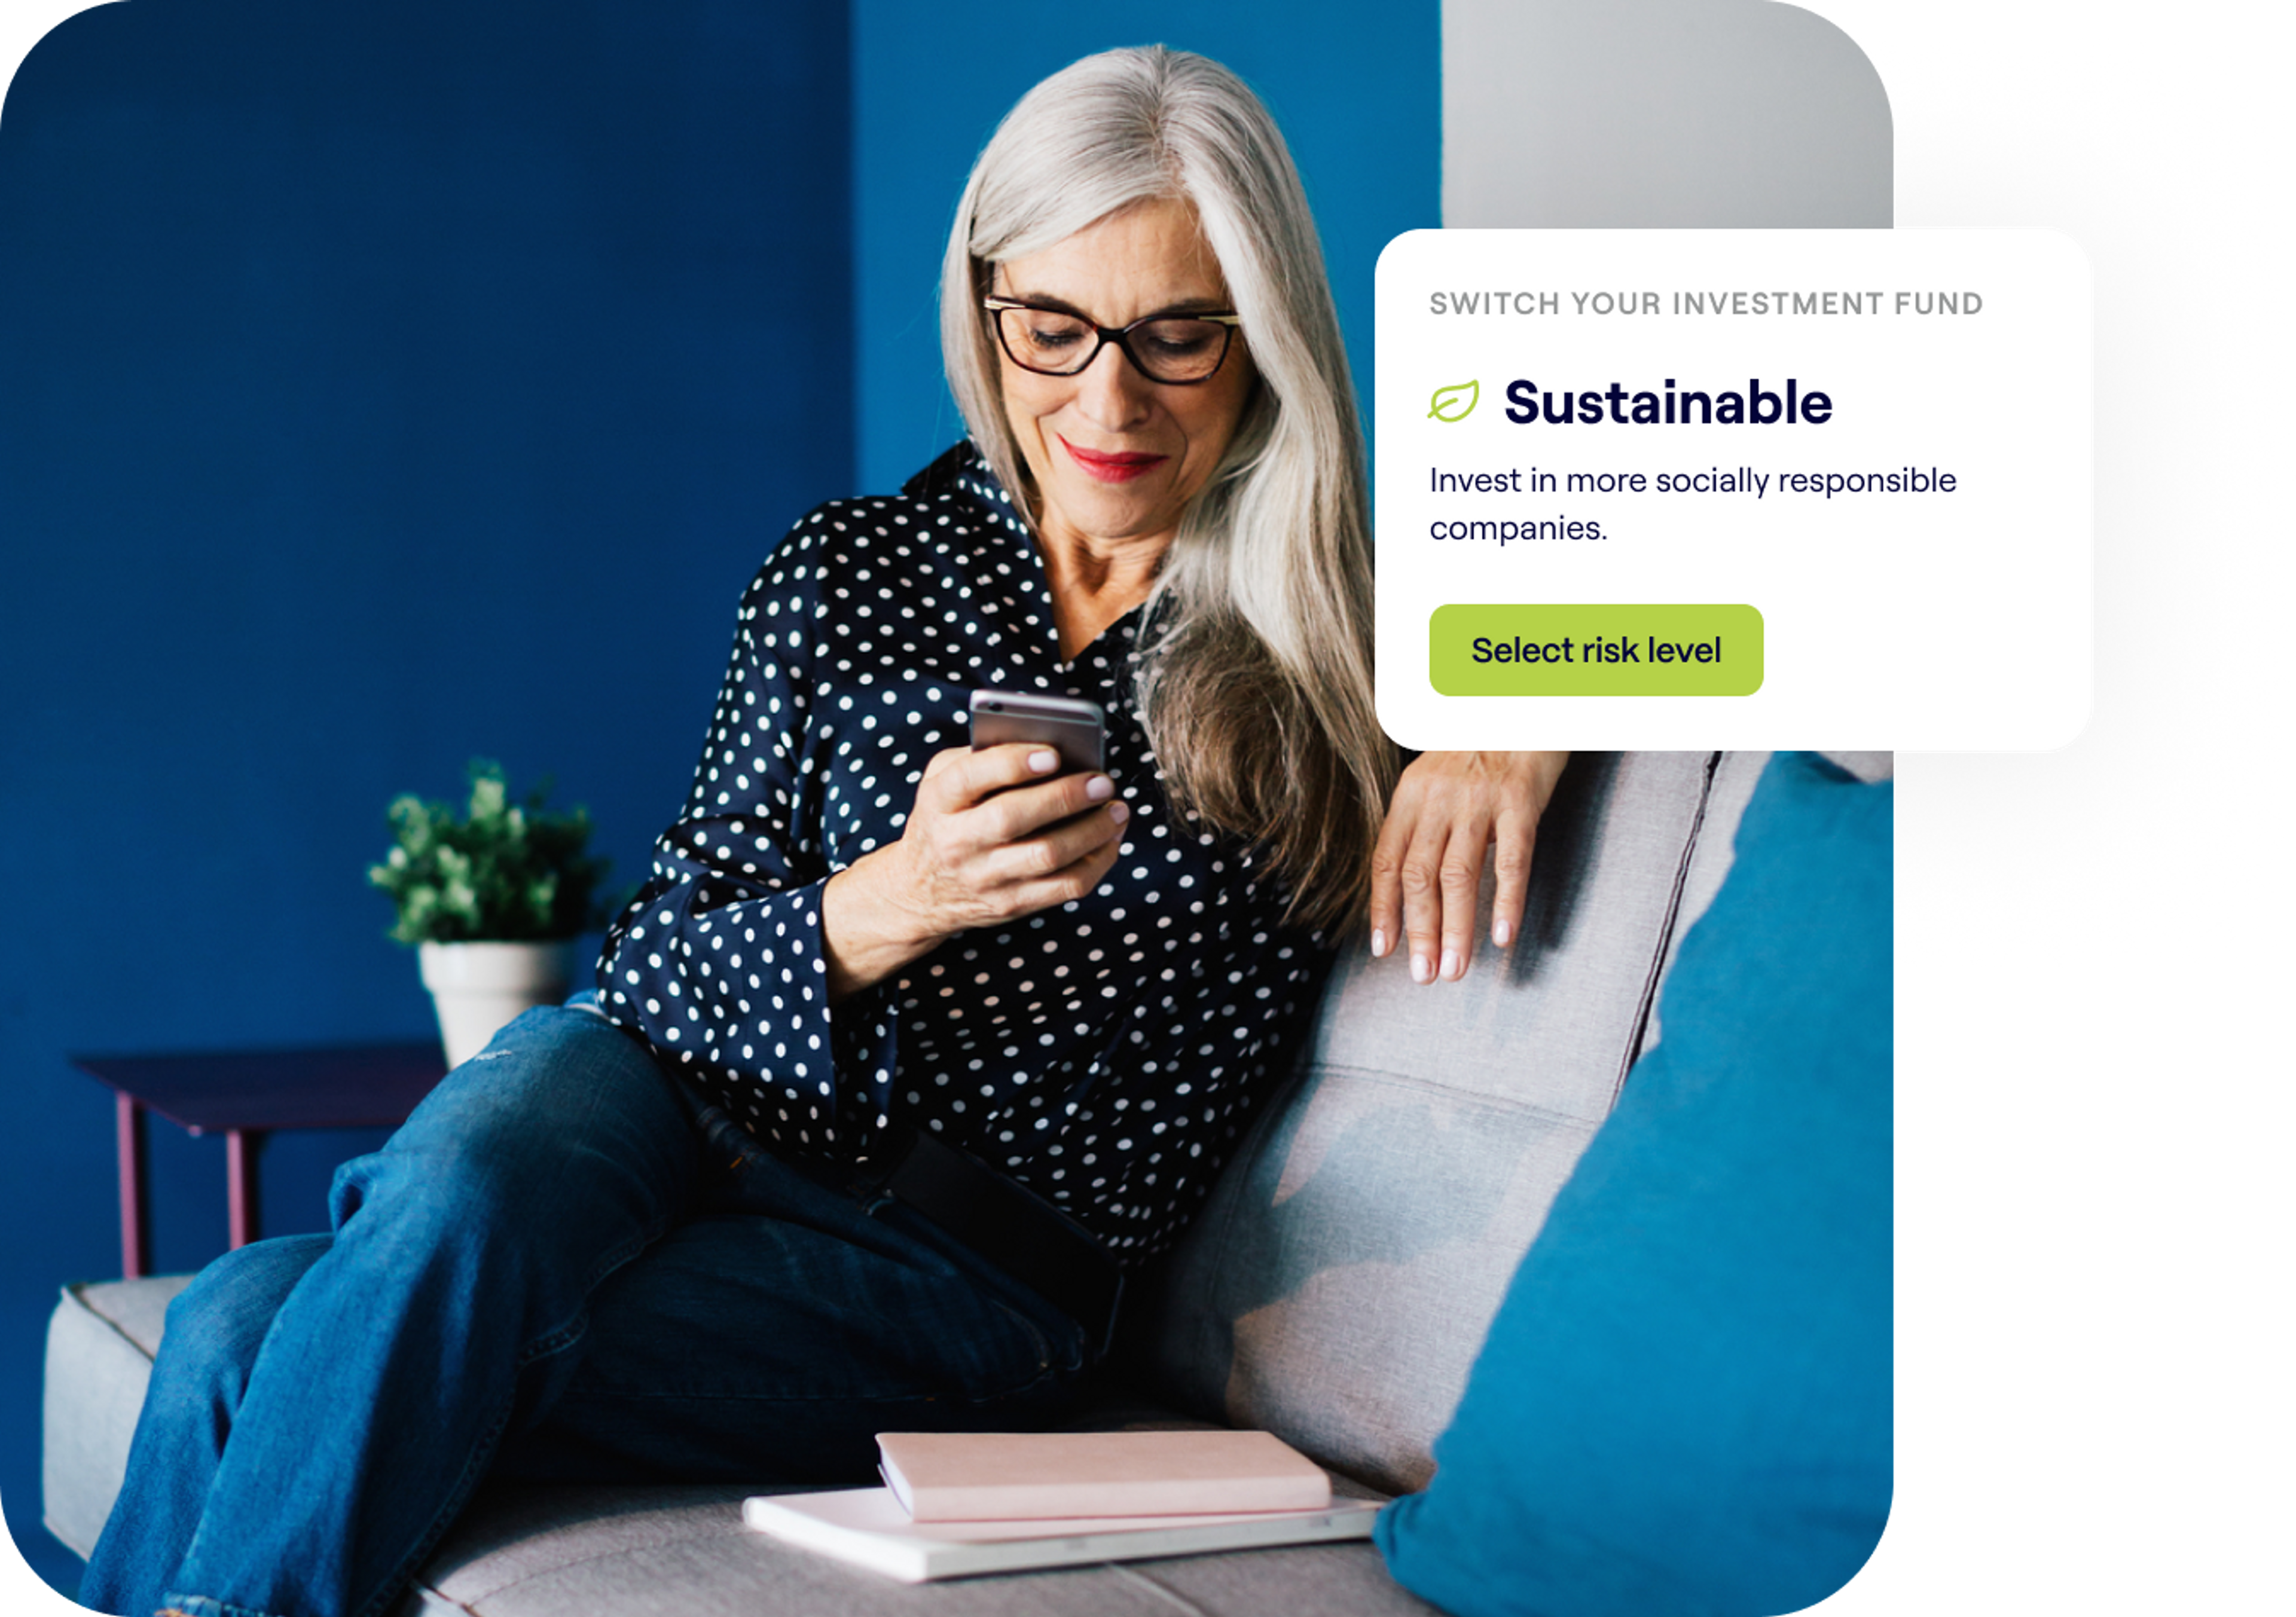 A photo of a woman smiling while looking at a phone and an excerpt of the Penfold pension app showing sustainable pension investment fund